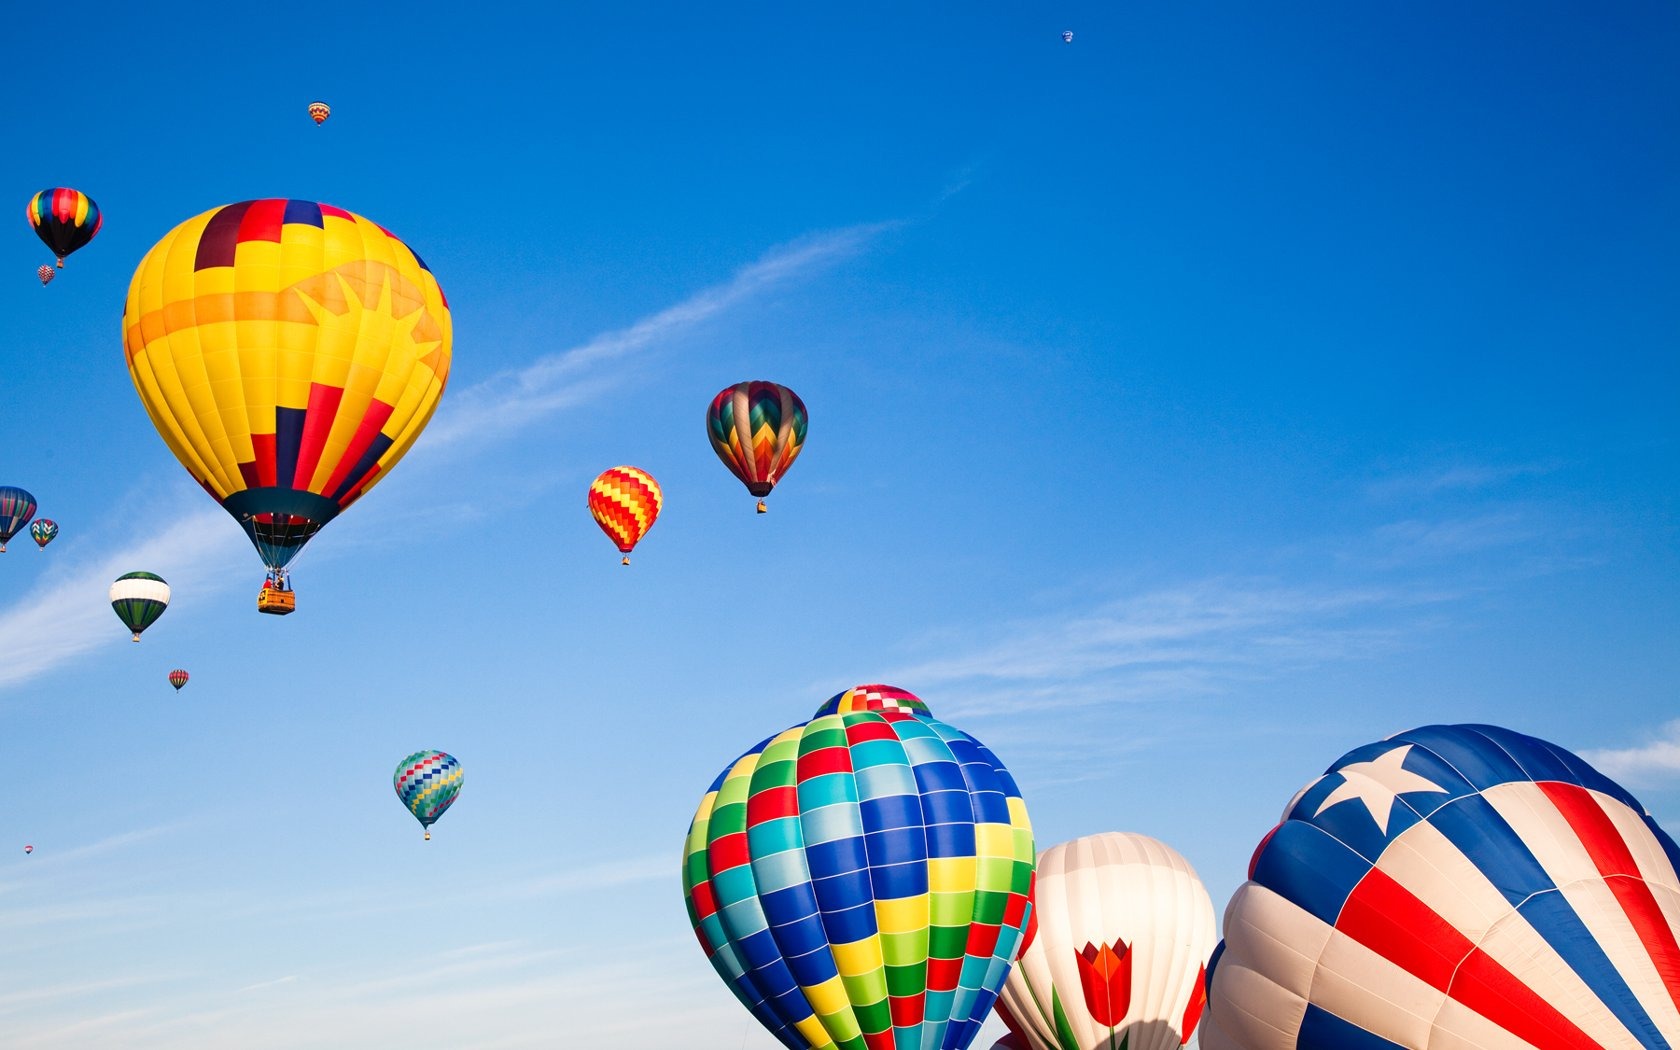 Colorful hot air balloons in sky   1680x1050 wallpaper download